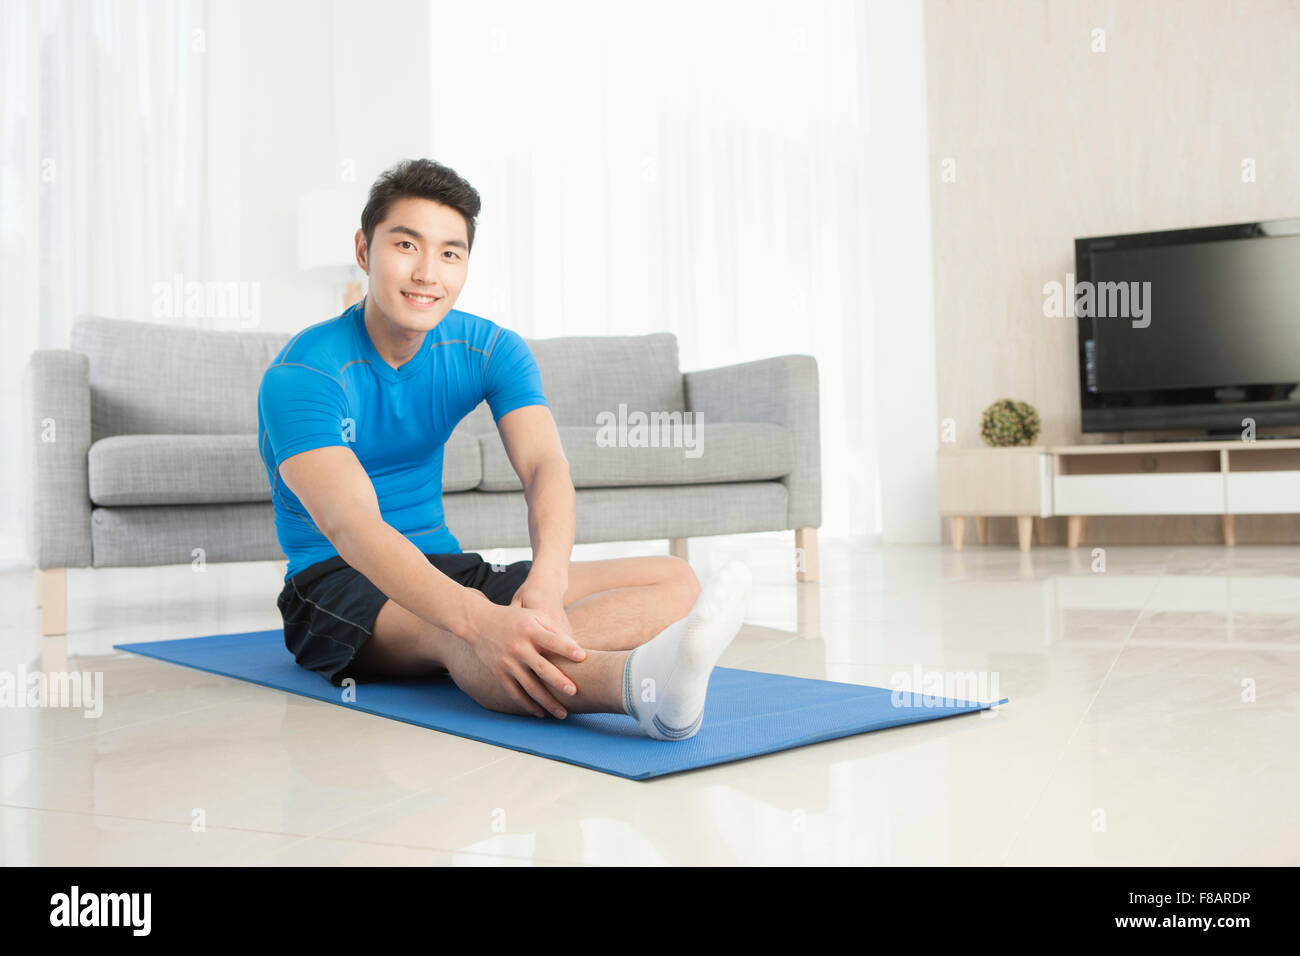 Man sitting and stretching on mat staring at front in living room Stock Photo